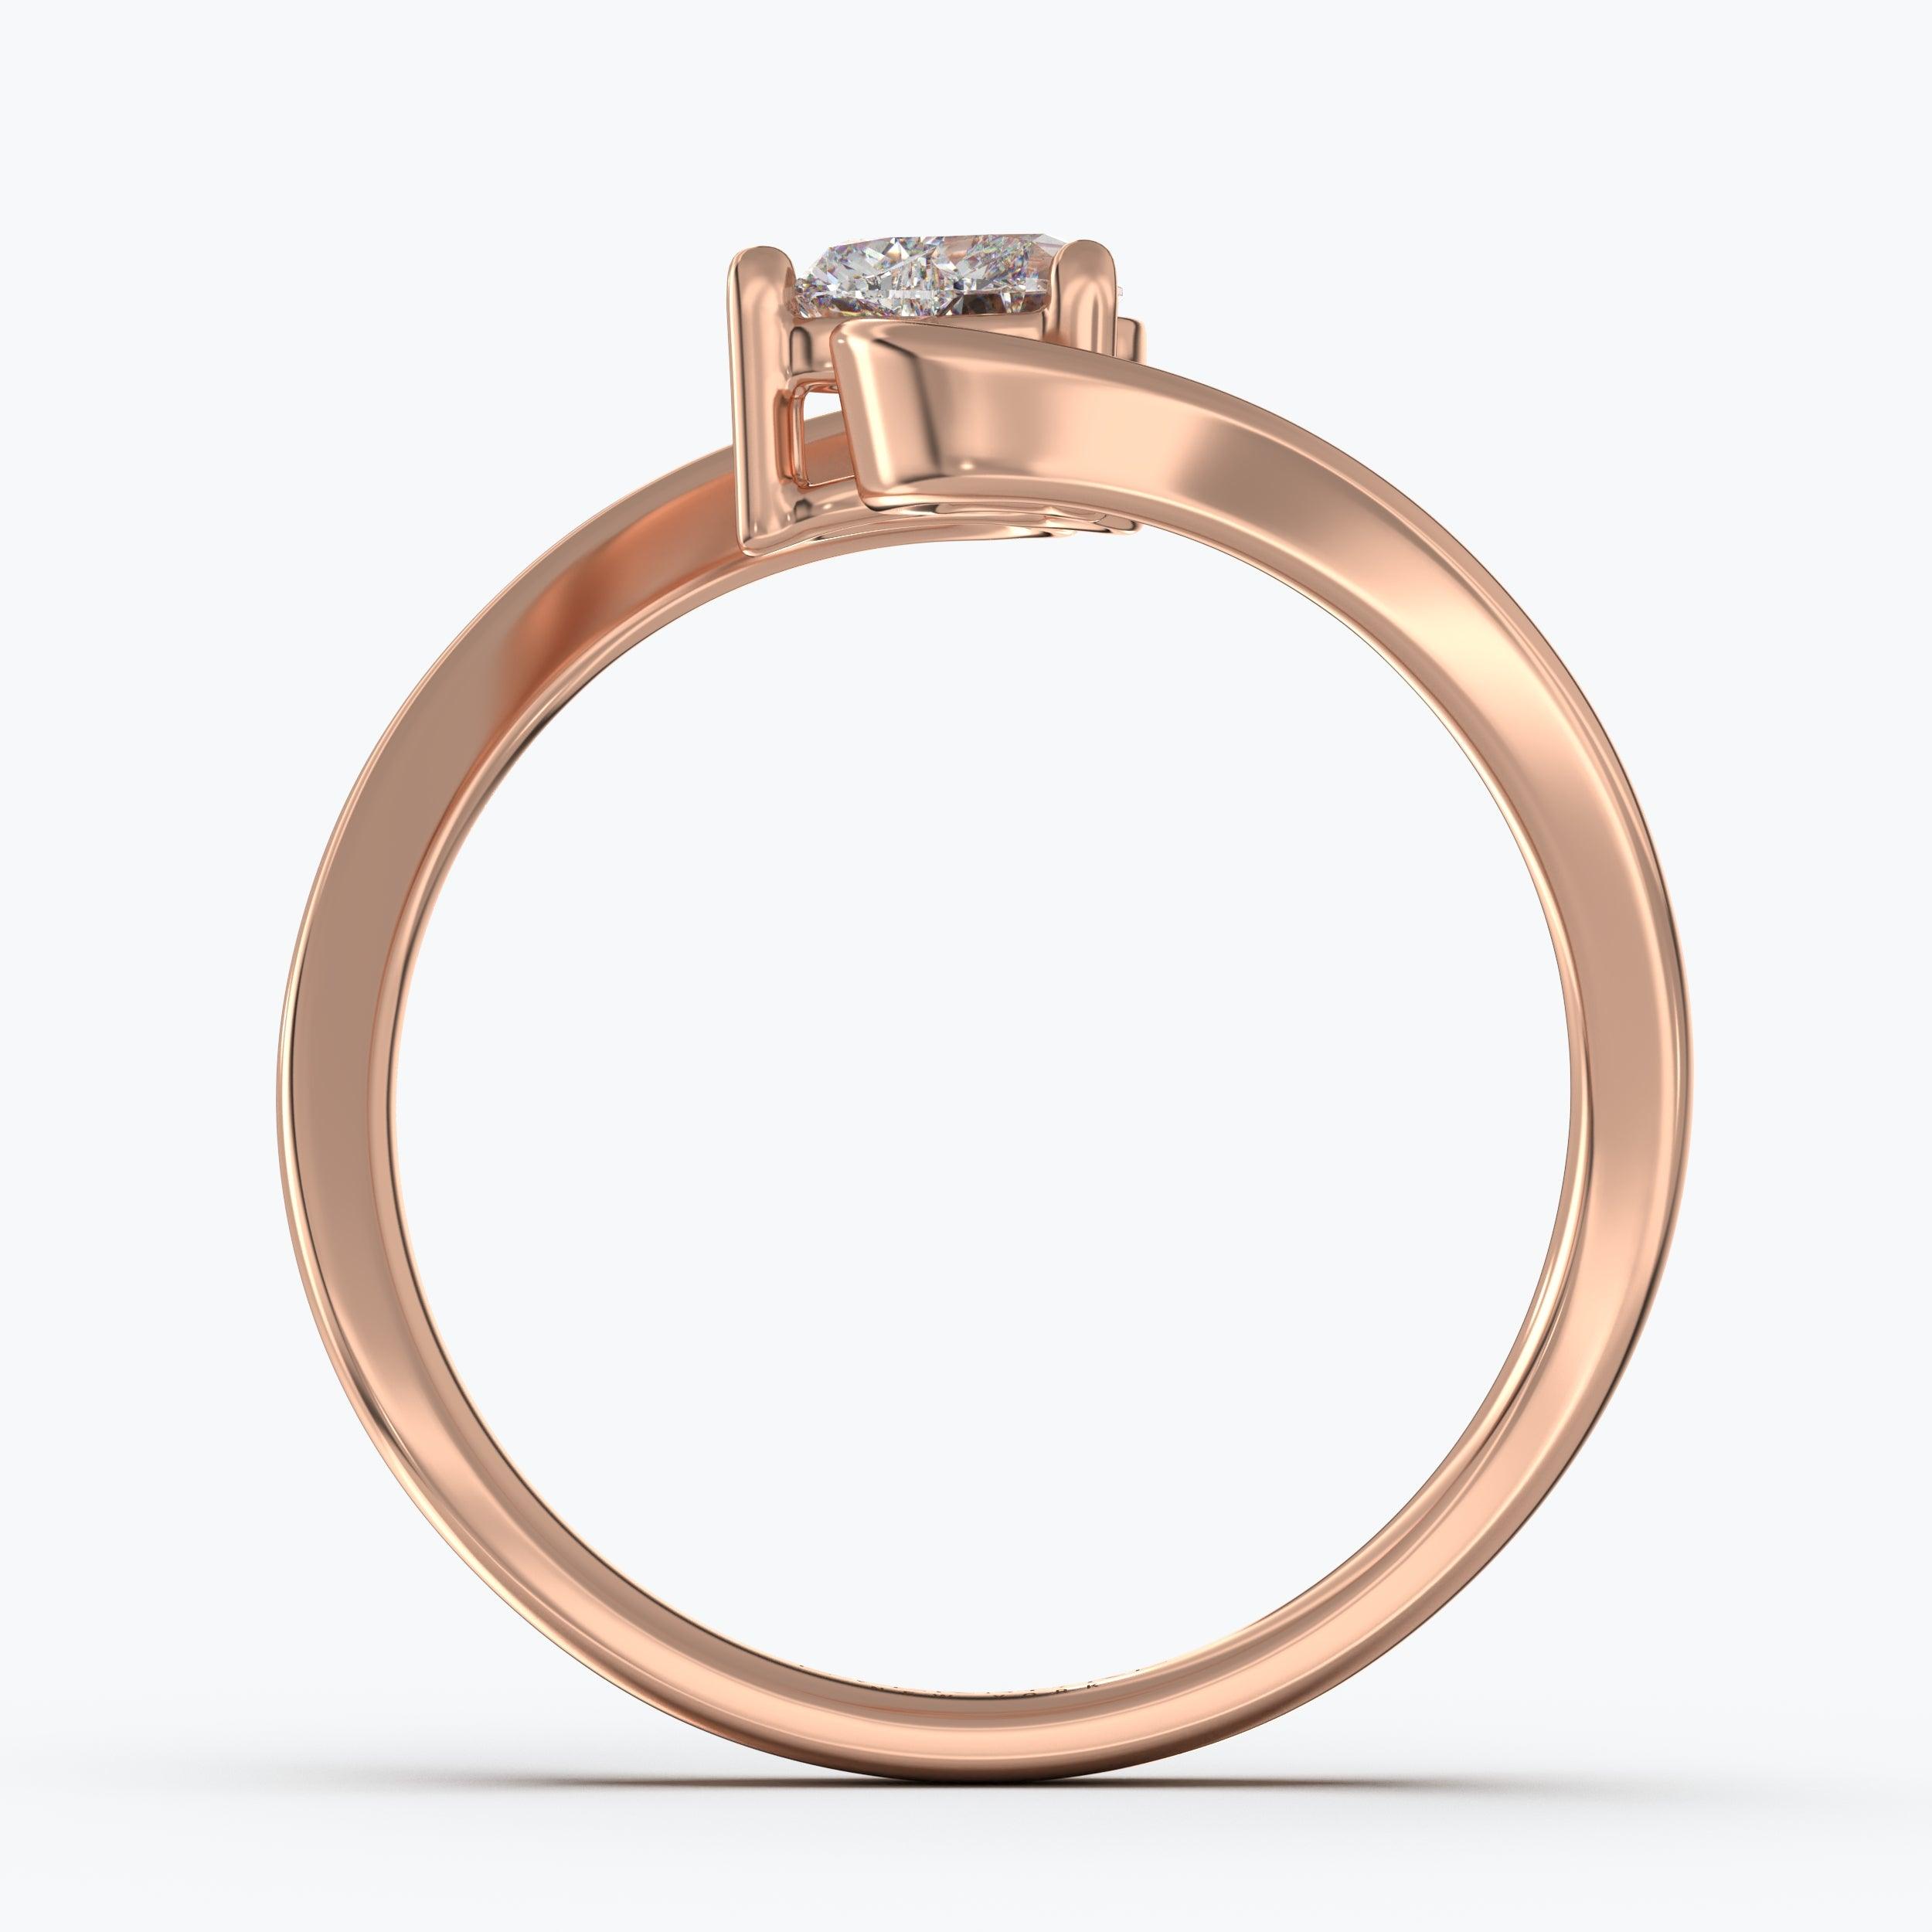 The Quirk Heart Cut - Rose Gold / 0.5 ct - Evermore Diamonds